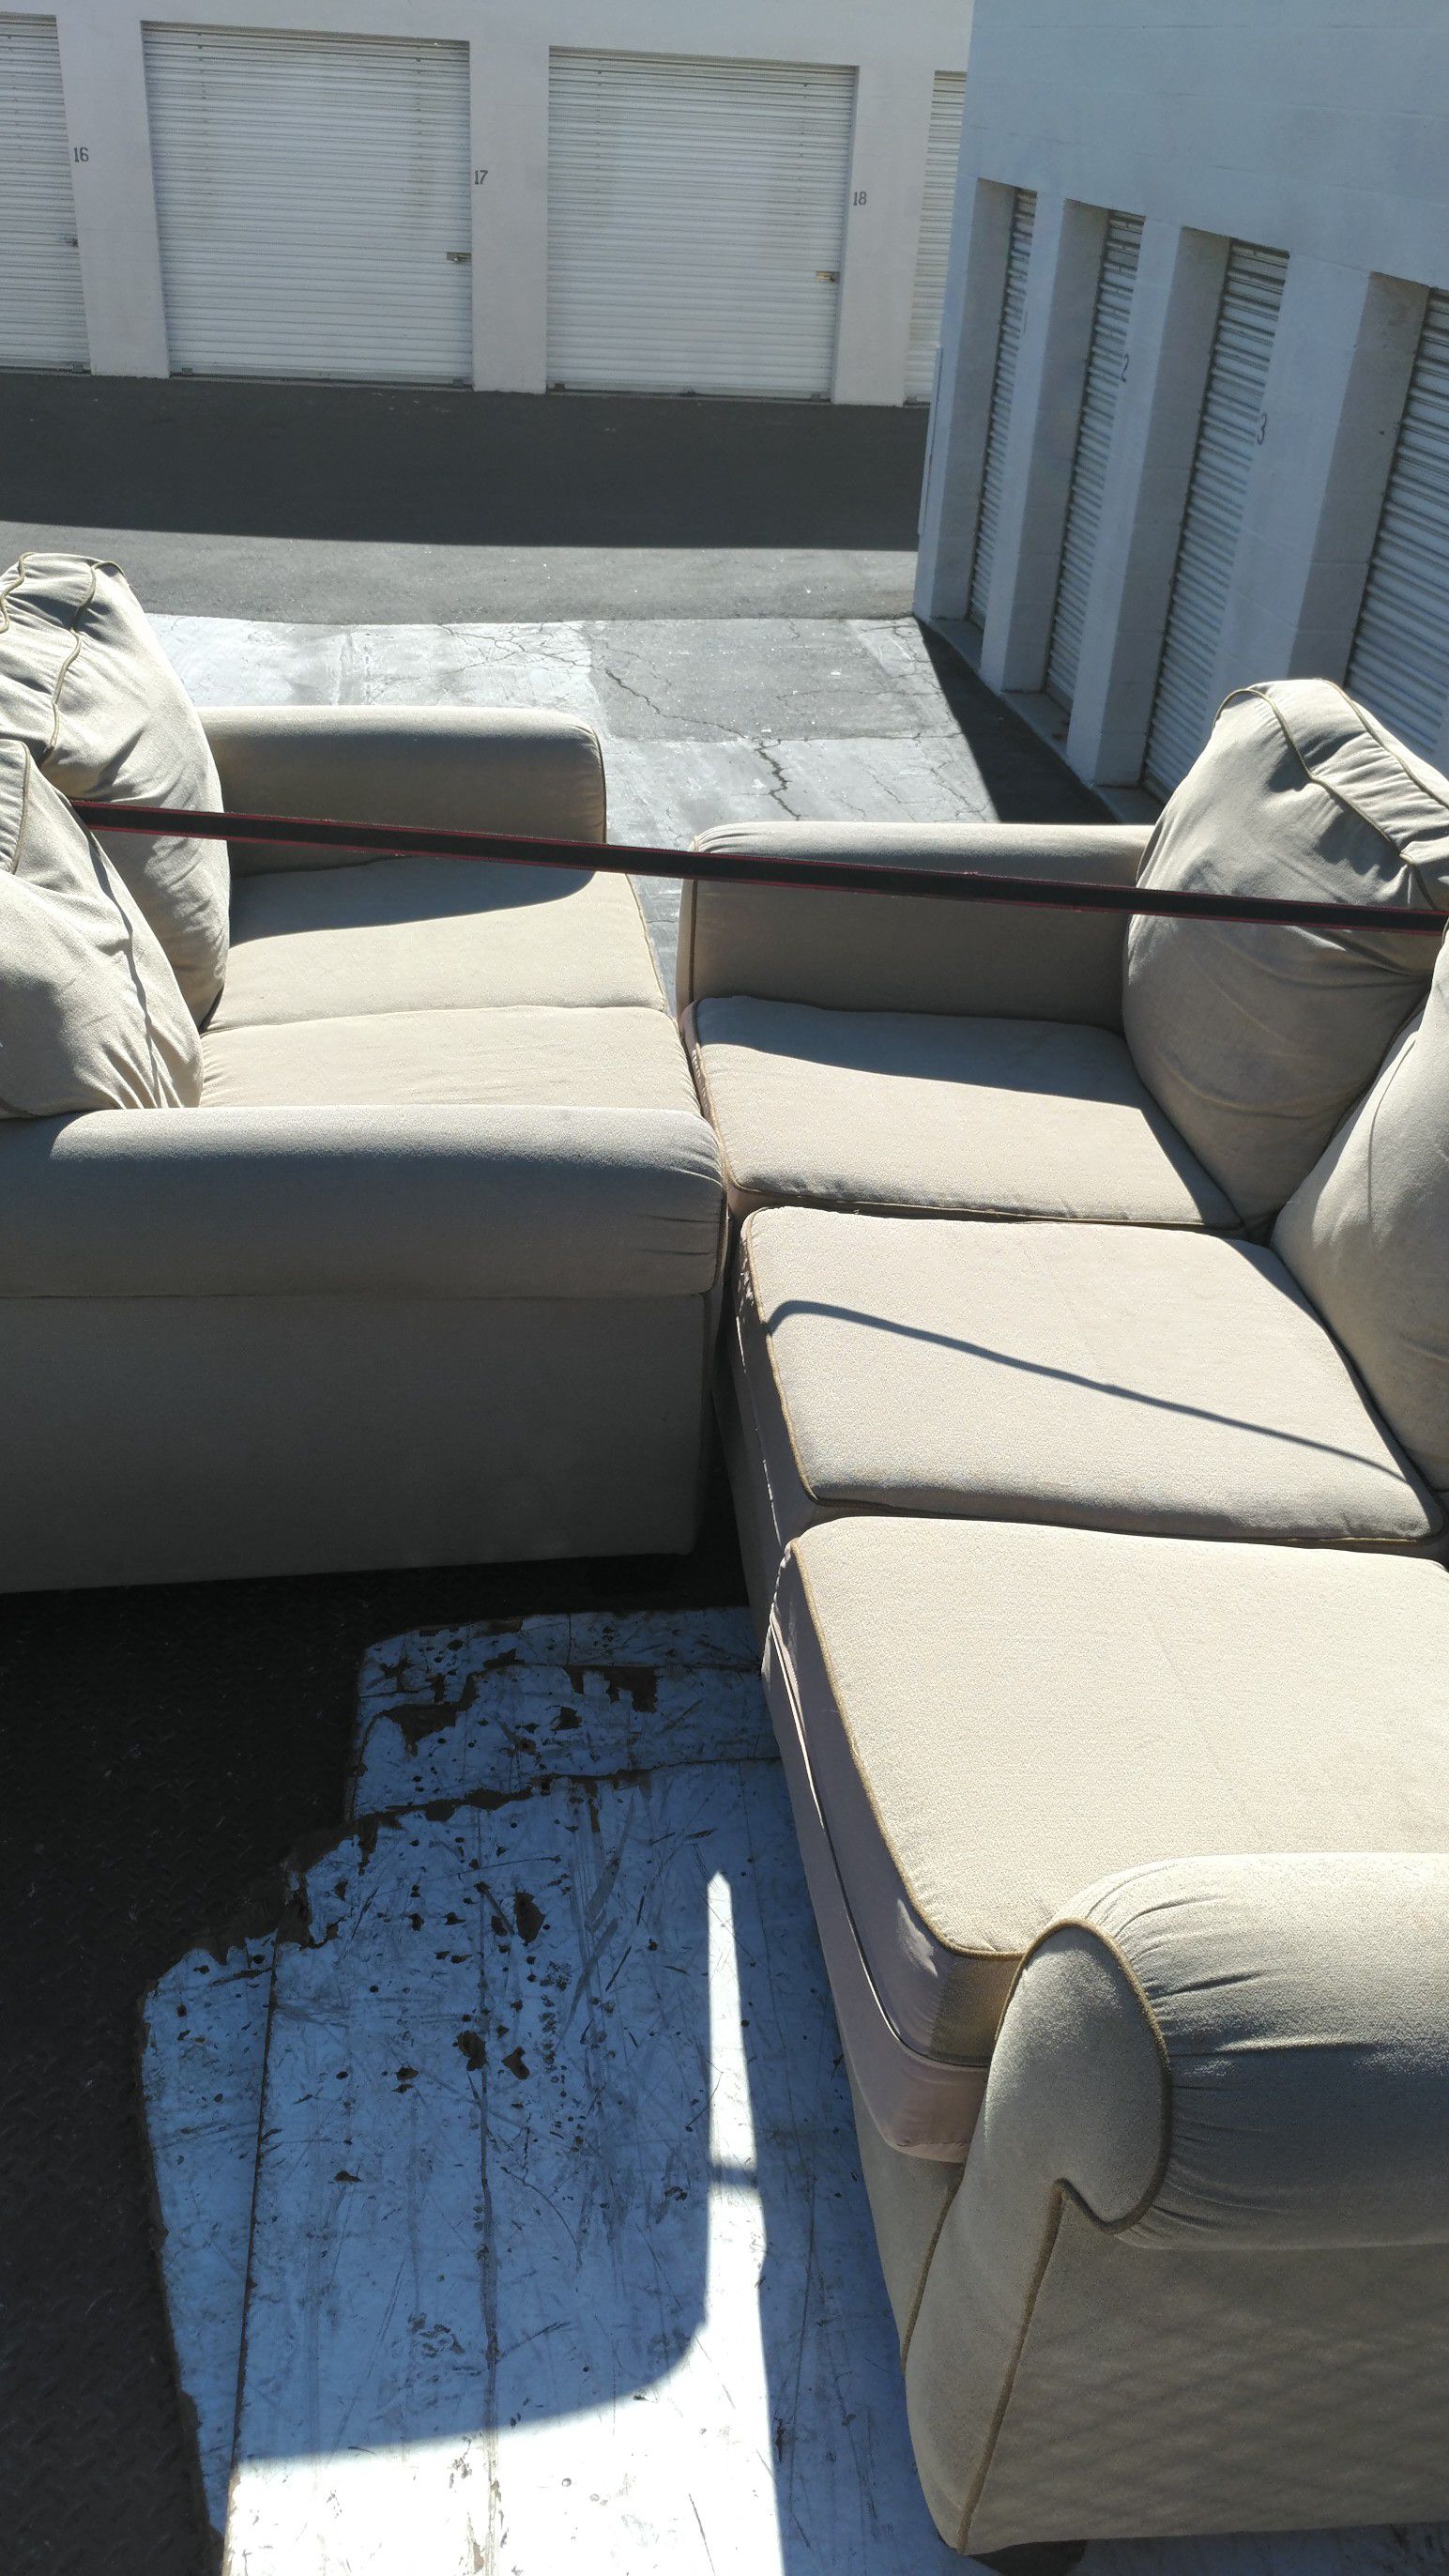 Free couch set